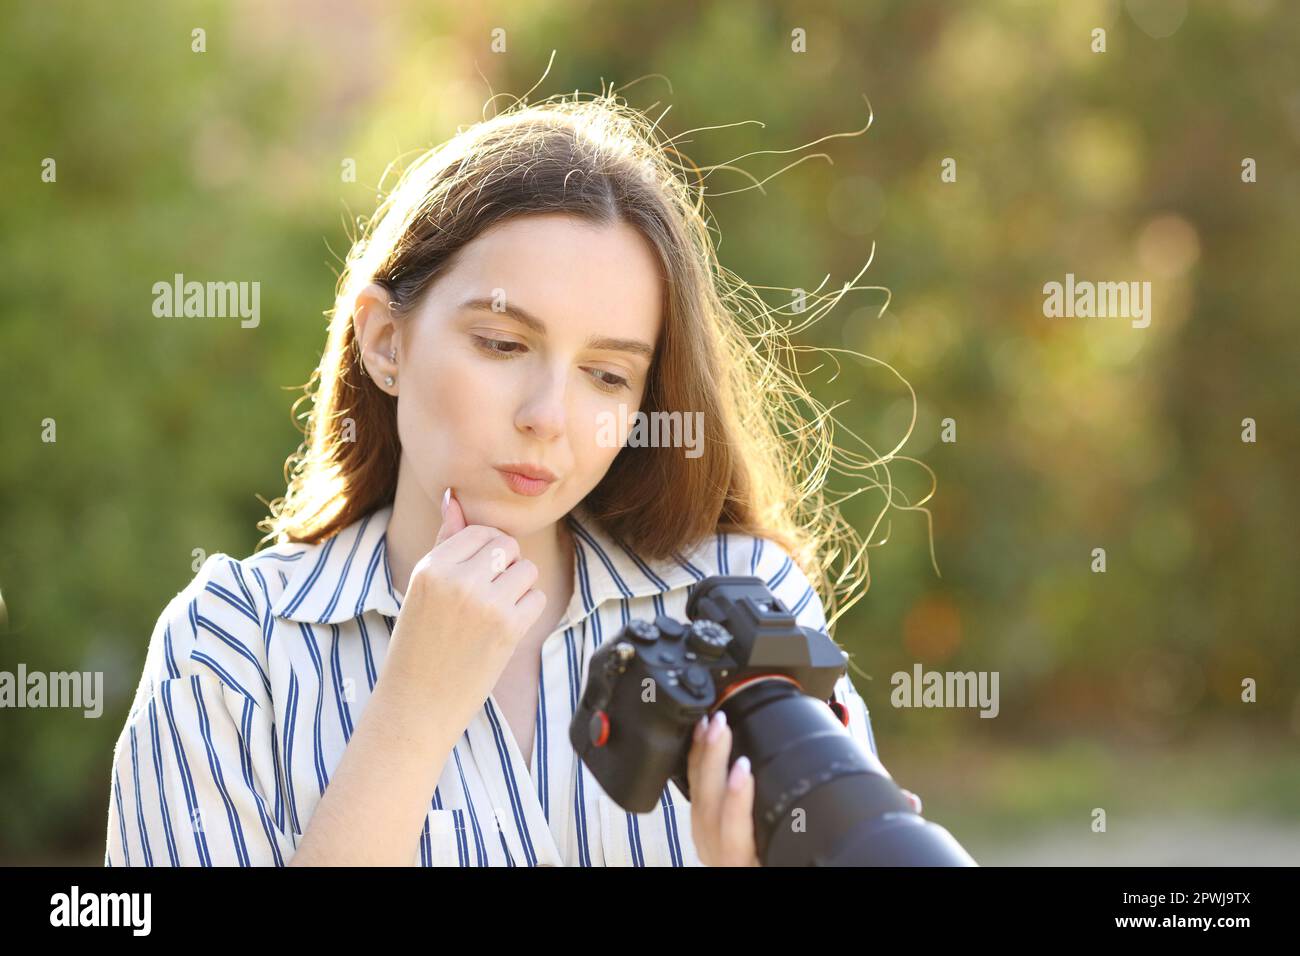 Doubtful photographer checking pictures on mirrorless camera in a park Stock Photo